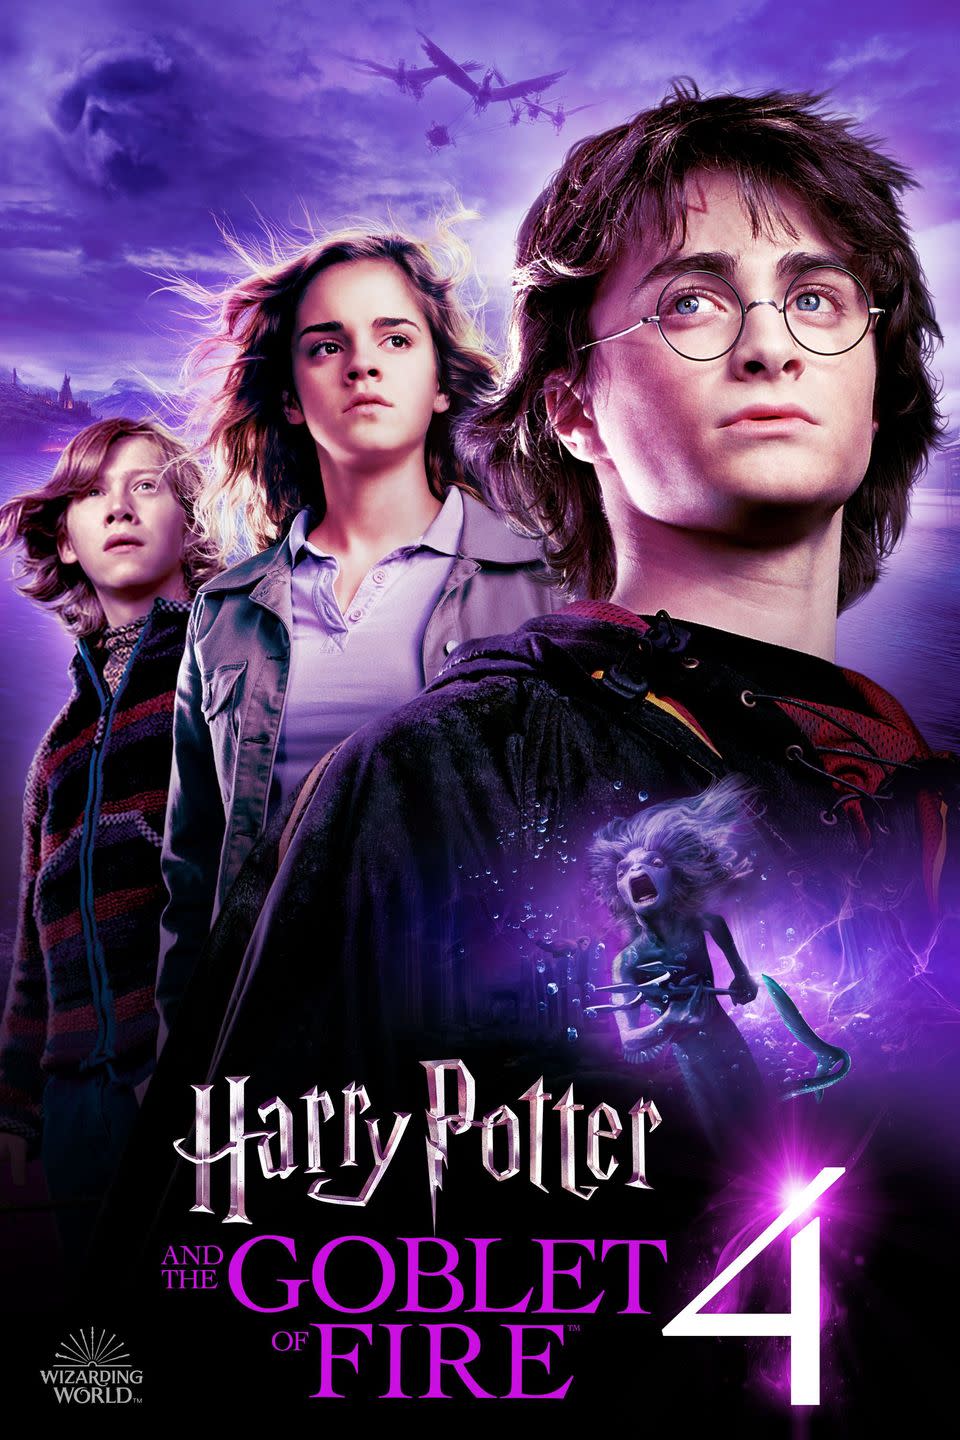 6) Harry Potter and the Goblet of Fire